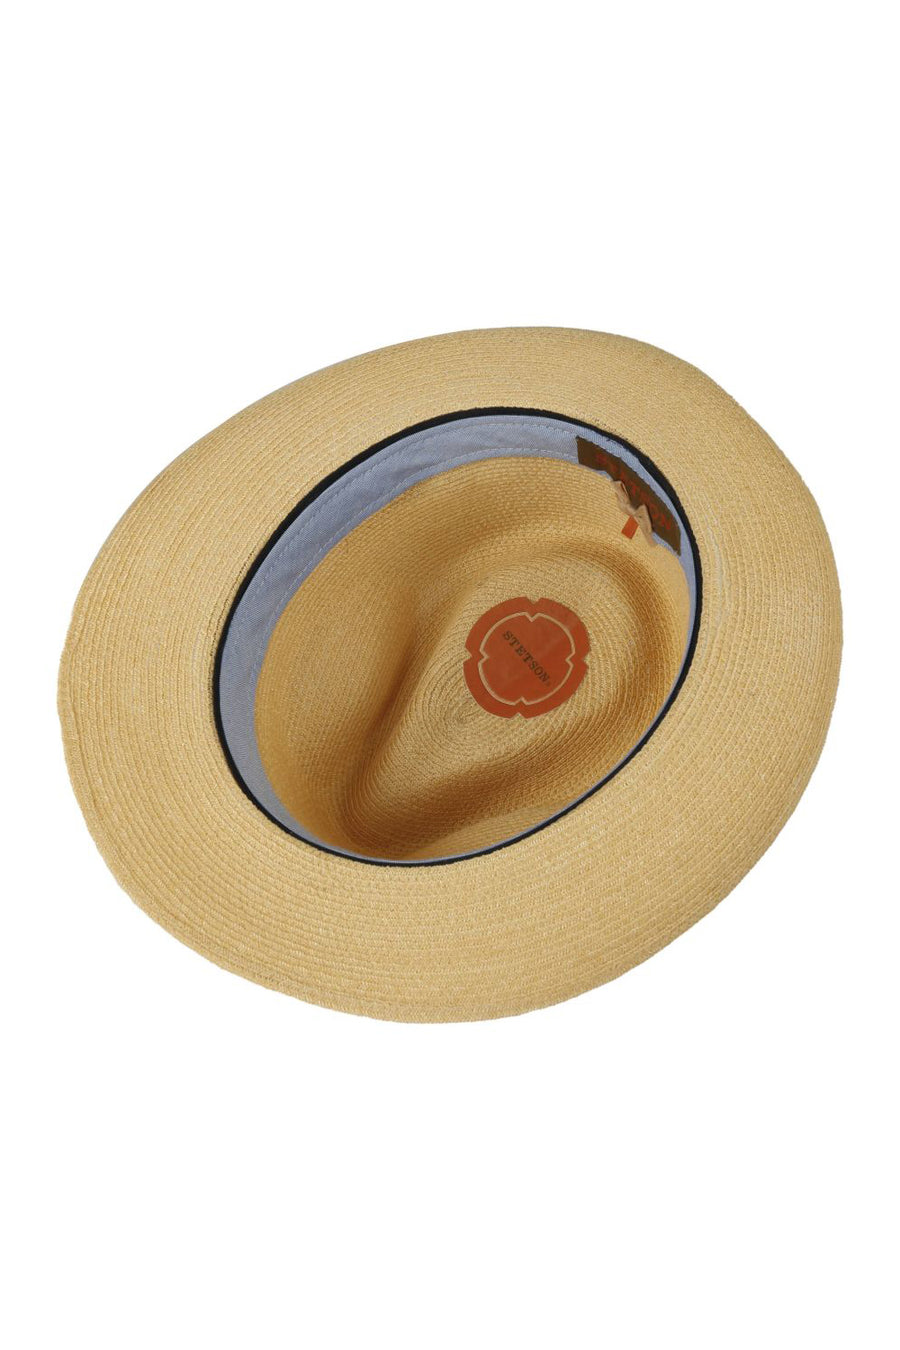 Buy the Stetson Kendrick Fedora Hemp Hat in Brown/Beige at Intro. Spend £50 for free UK delivery. Official stockists. We ship worldwide.